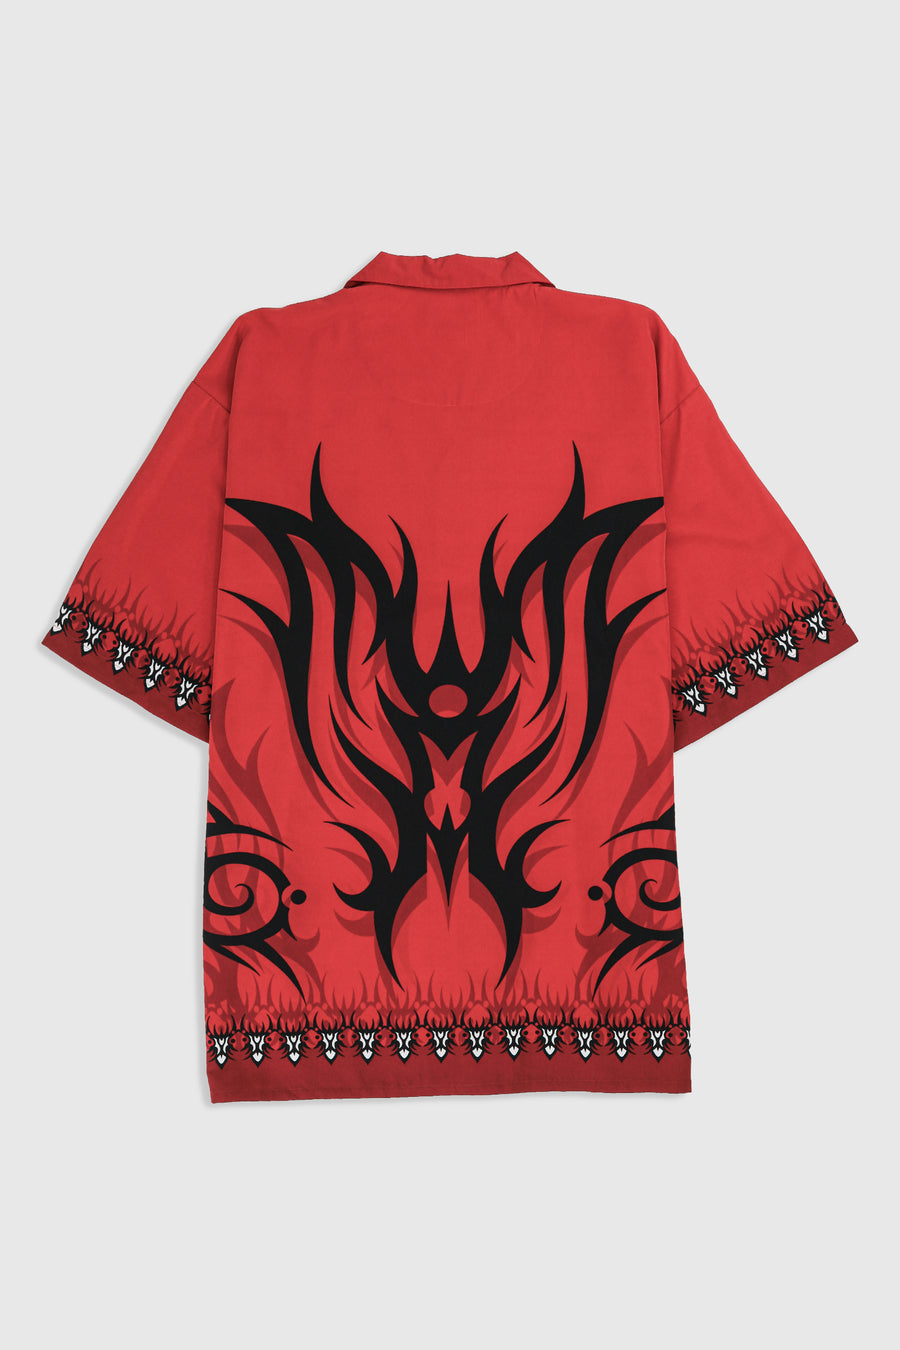 Deadstock Dragonfly Red Tribal Camp Shirt - XXXL